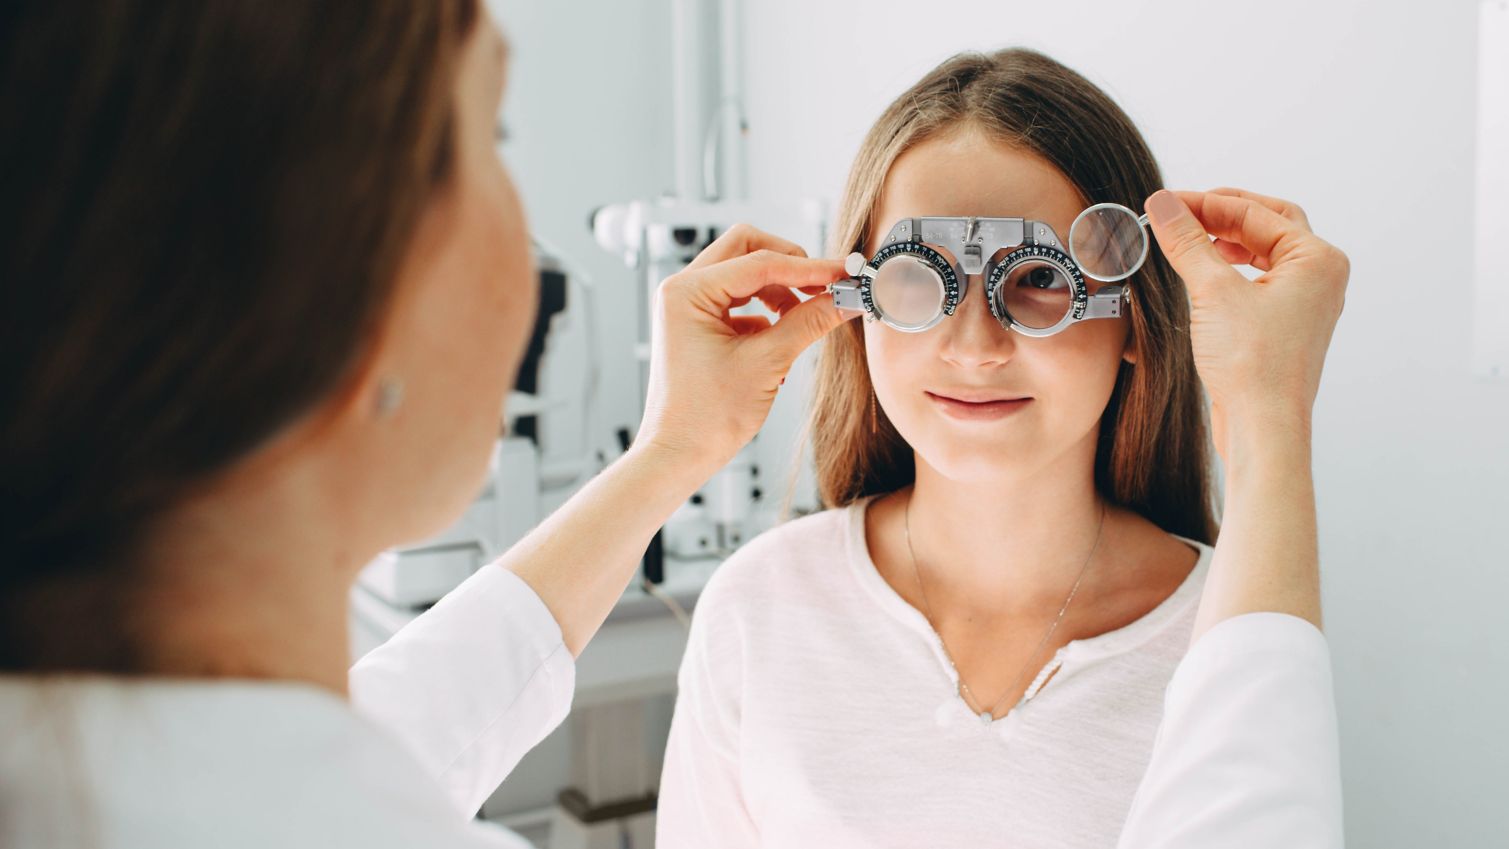 Child getting vision exam from vision professional